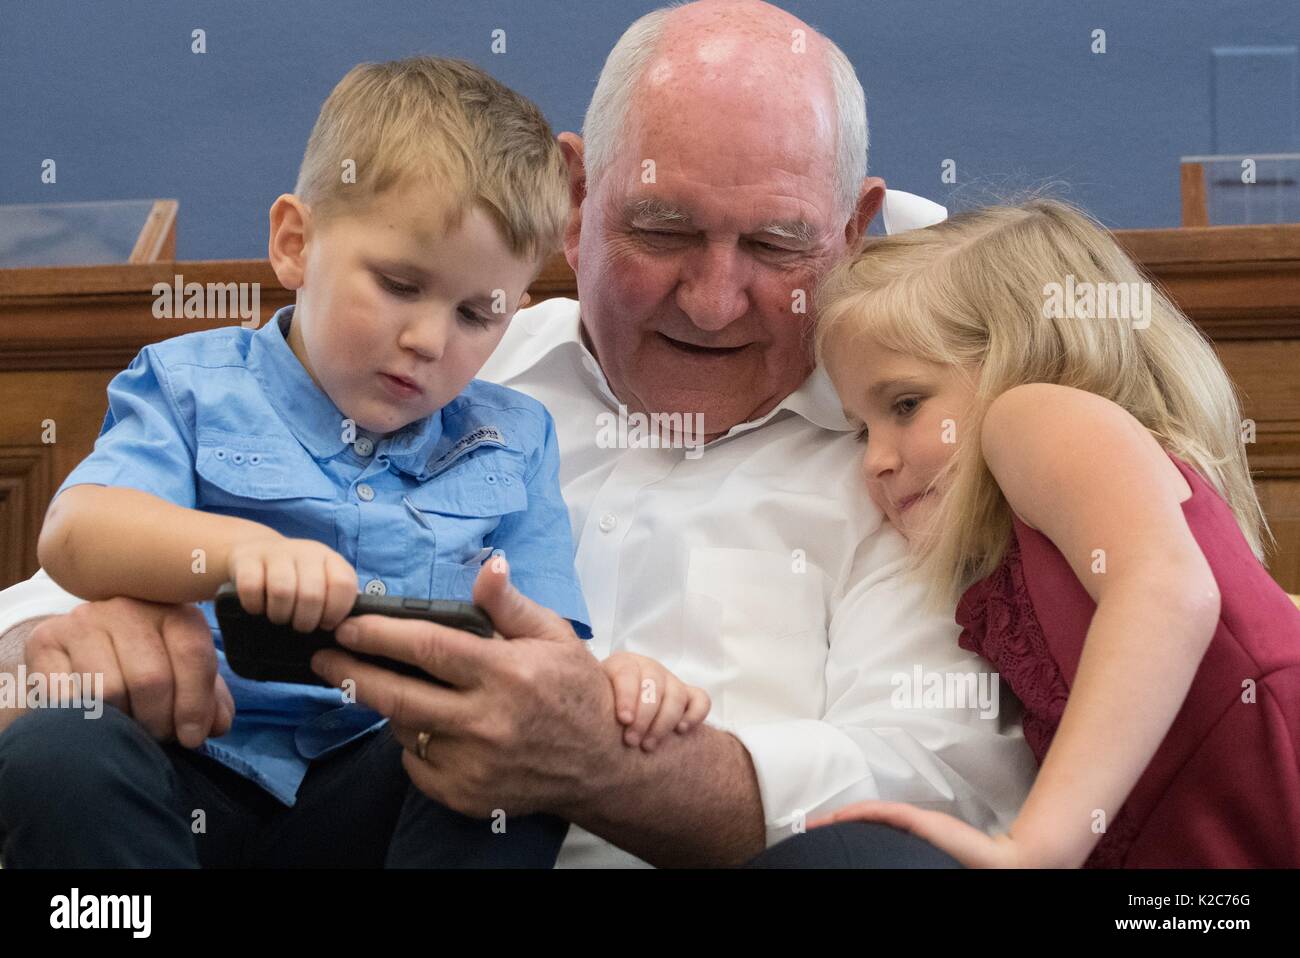 U.S. Agriculture Secretary Sonny Perdue takes a break from his first day on the job to play with his grandchildren at the U.S. Department of Agriculture Headquarters April 25, 2017 in Washington, DC. Stock Photo